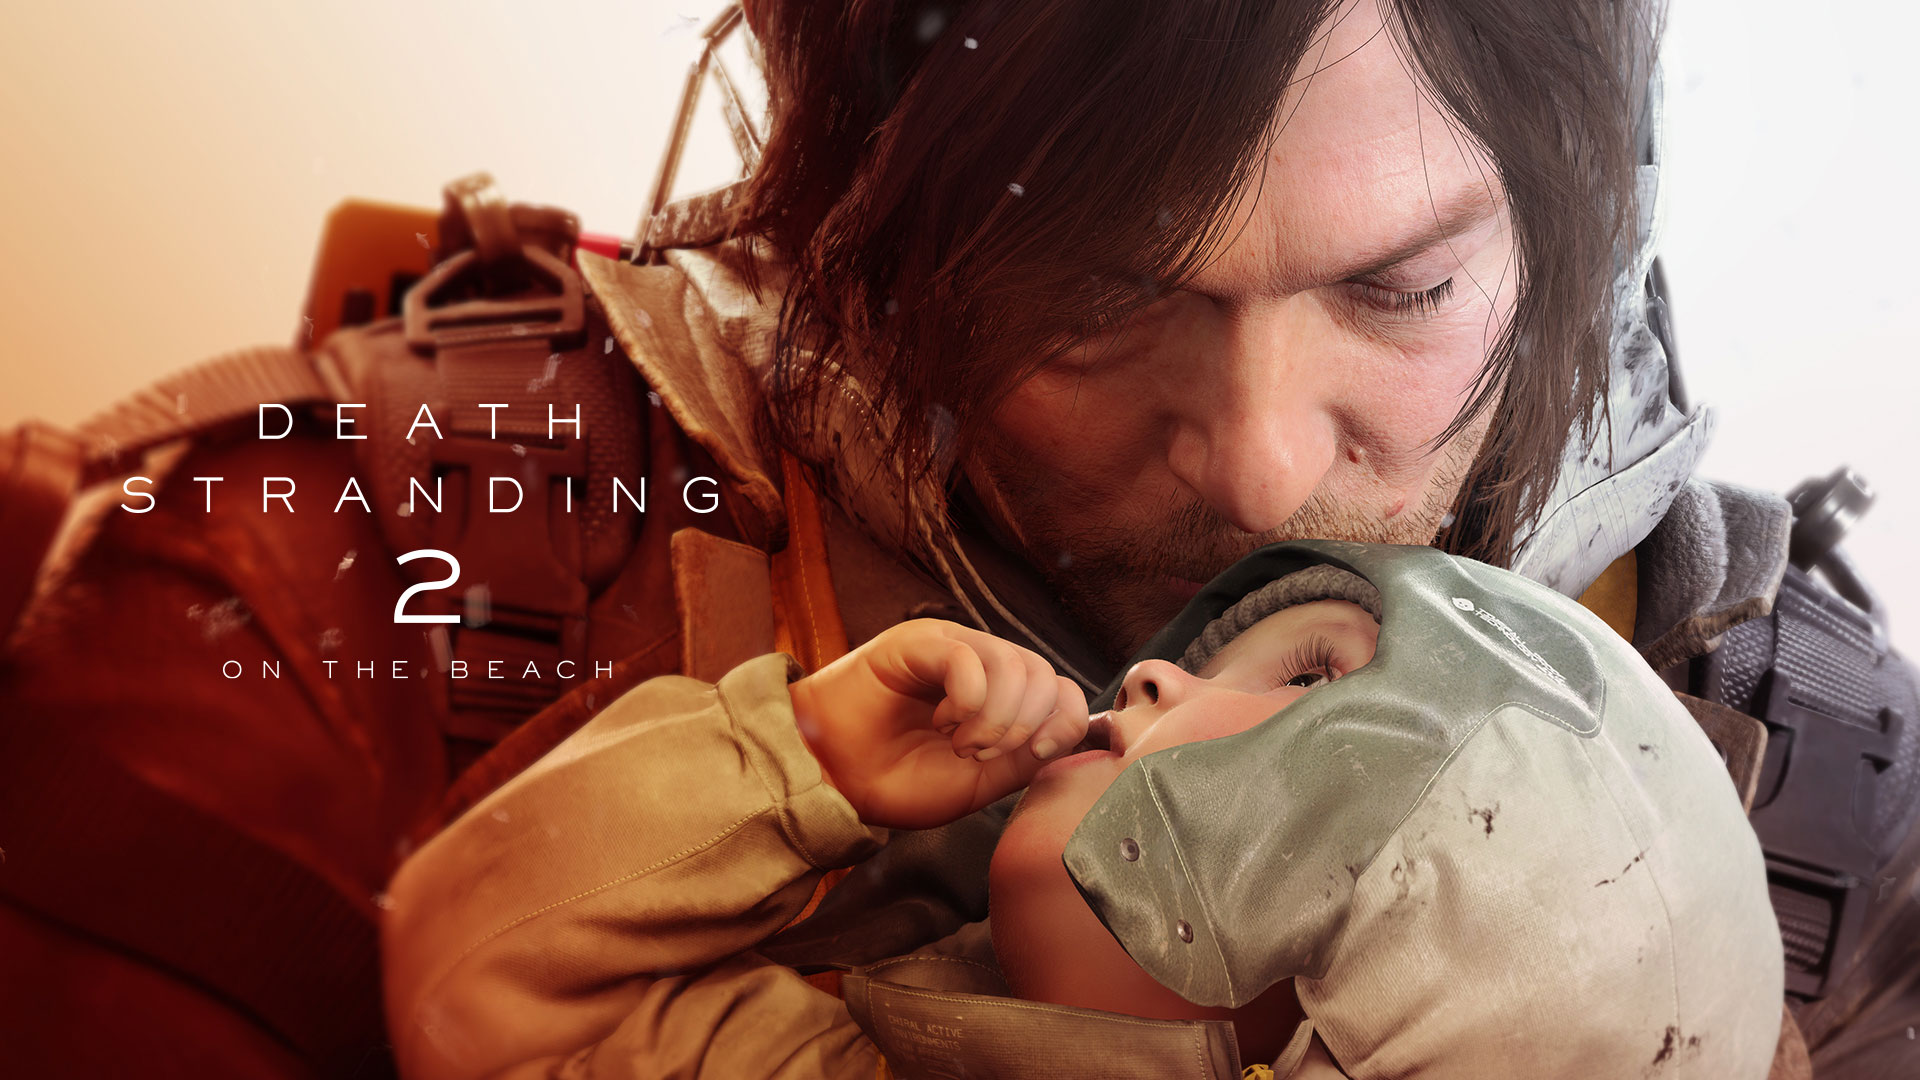 Cliff won't be making a return in Death Stranding 2